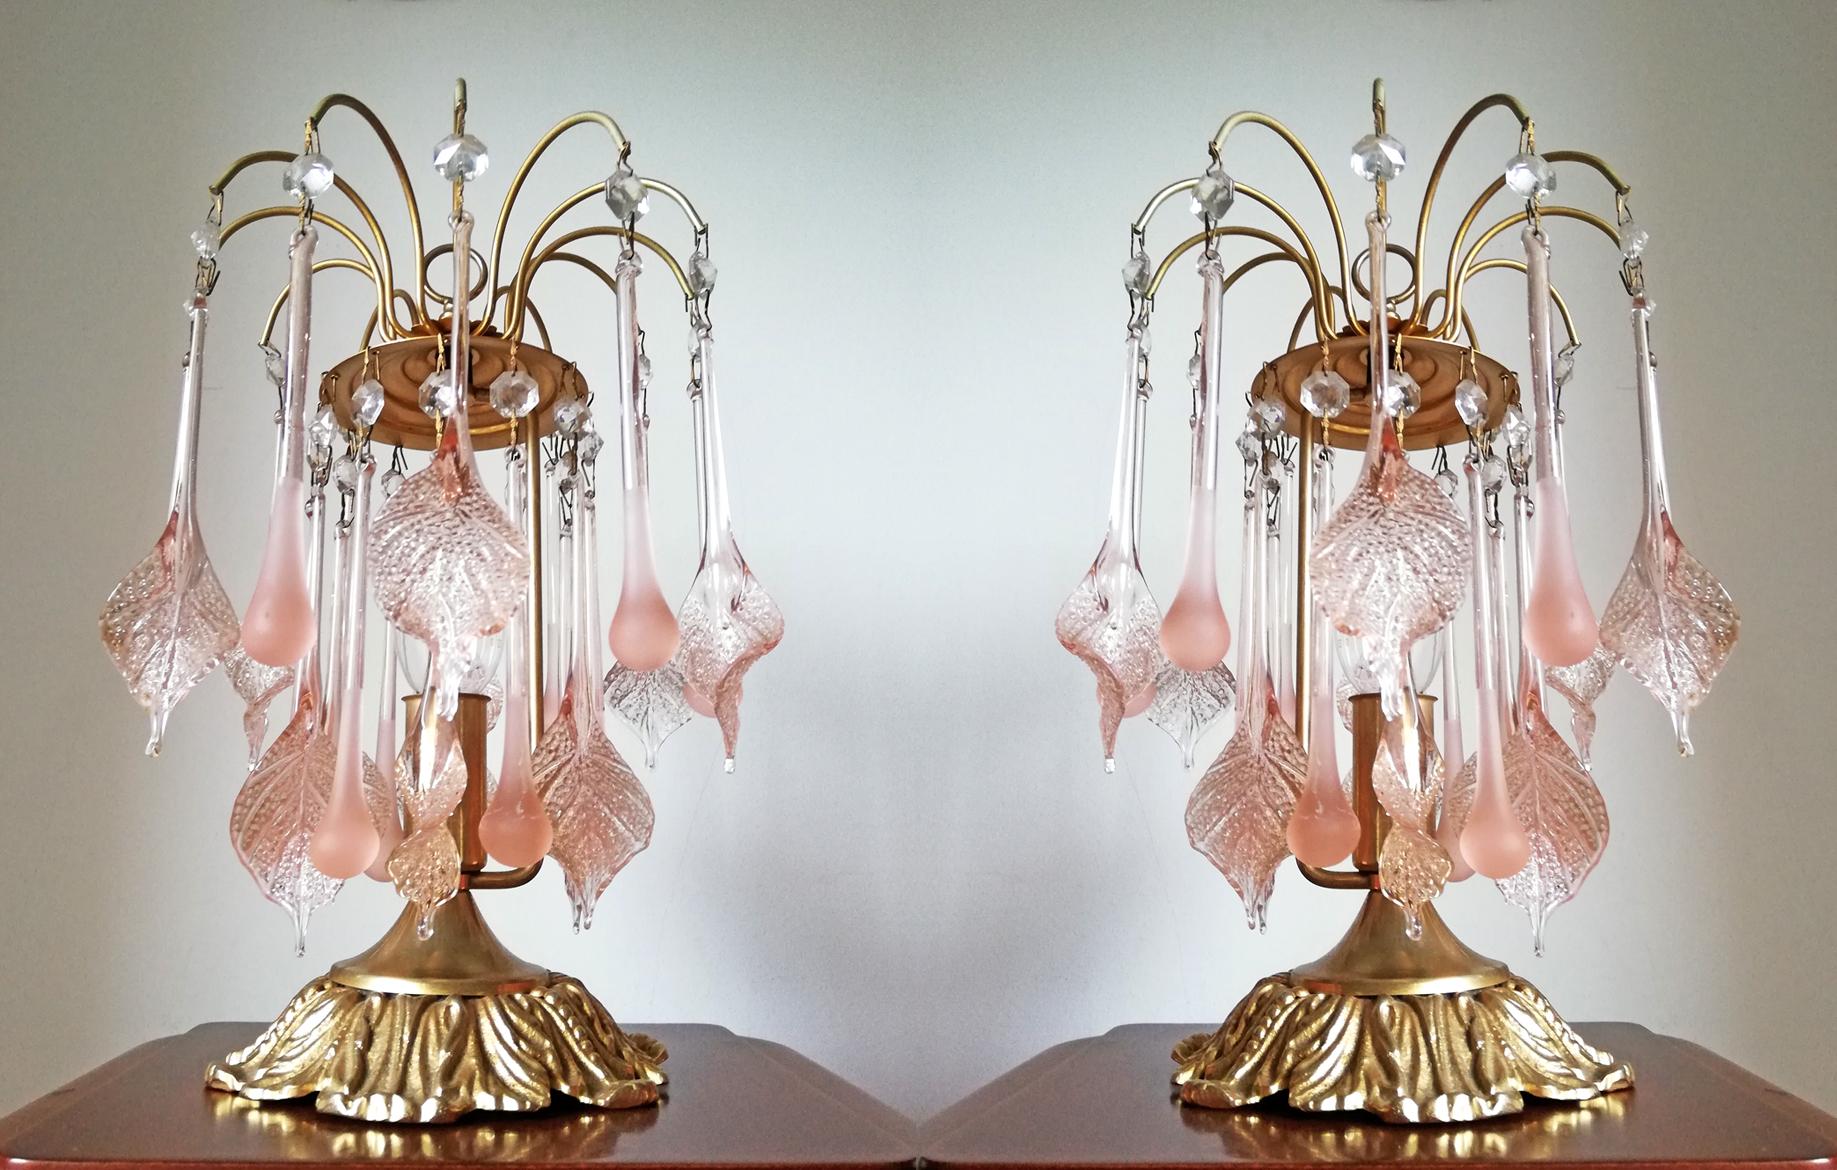 Pair of Italian Venini Murano era hand blown art glass clear and frosted teardrop cascade Murano Art-Glass table lamps or Mid-Century Modernist or vintage, 1970s
Materials: hand blown glass (pink and clear glass) and gold-plated